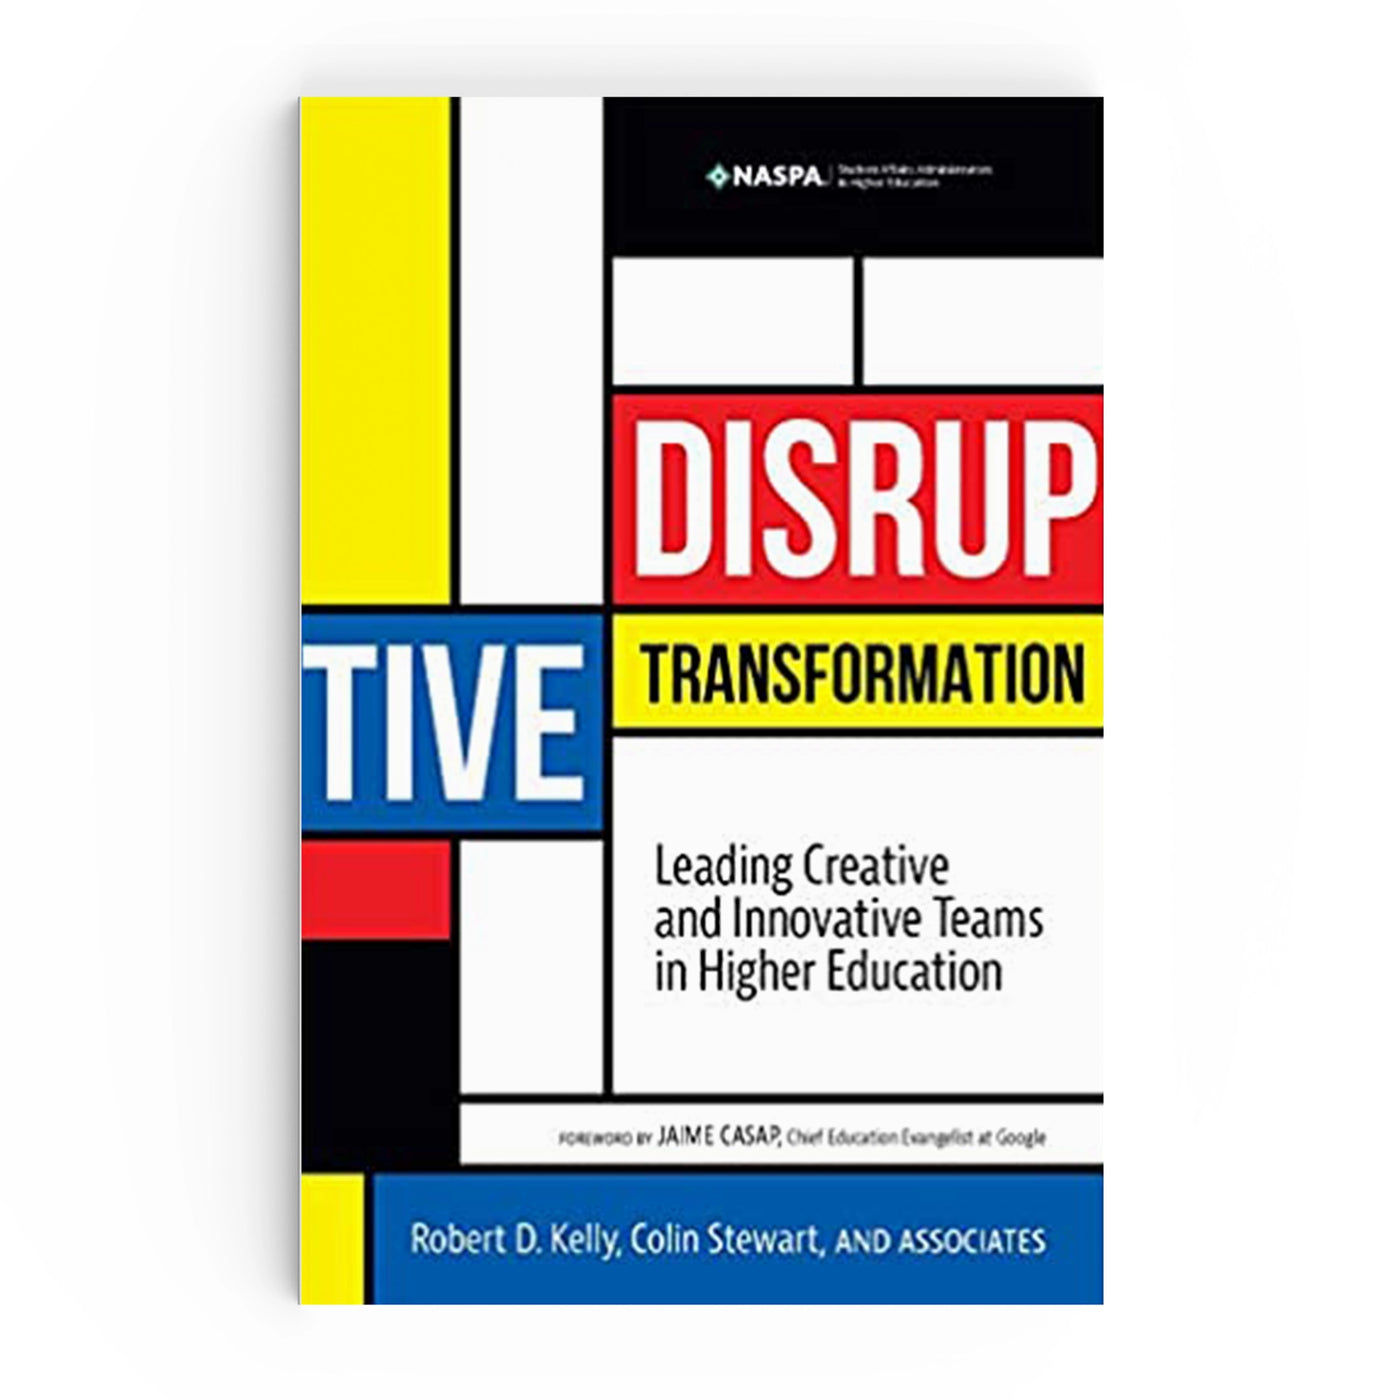 Disruptive Transformation by Robert Kelly and Colin Stewart